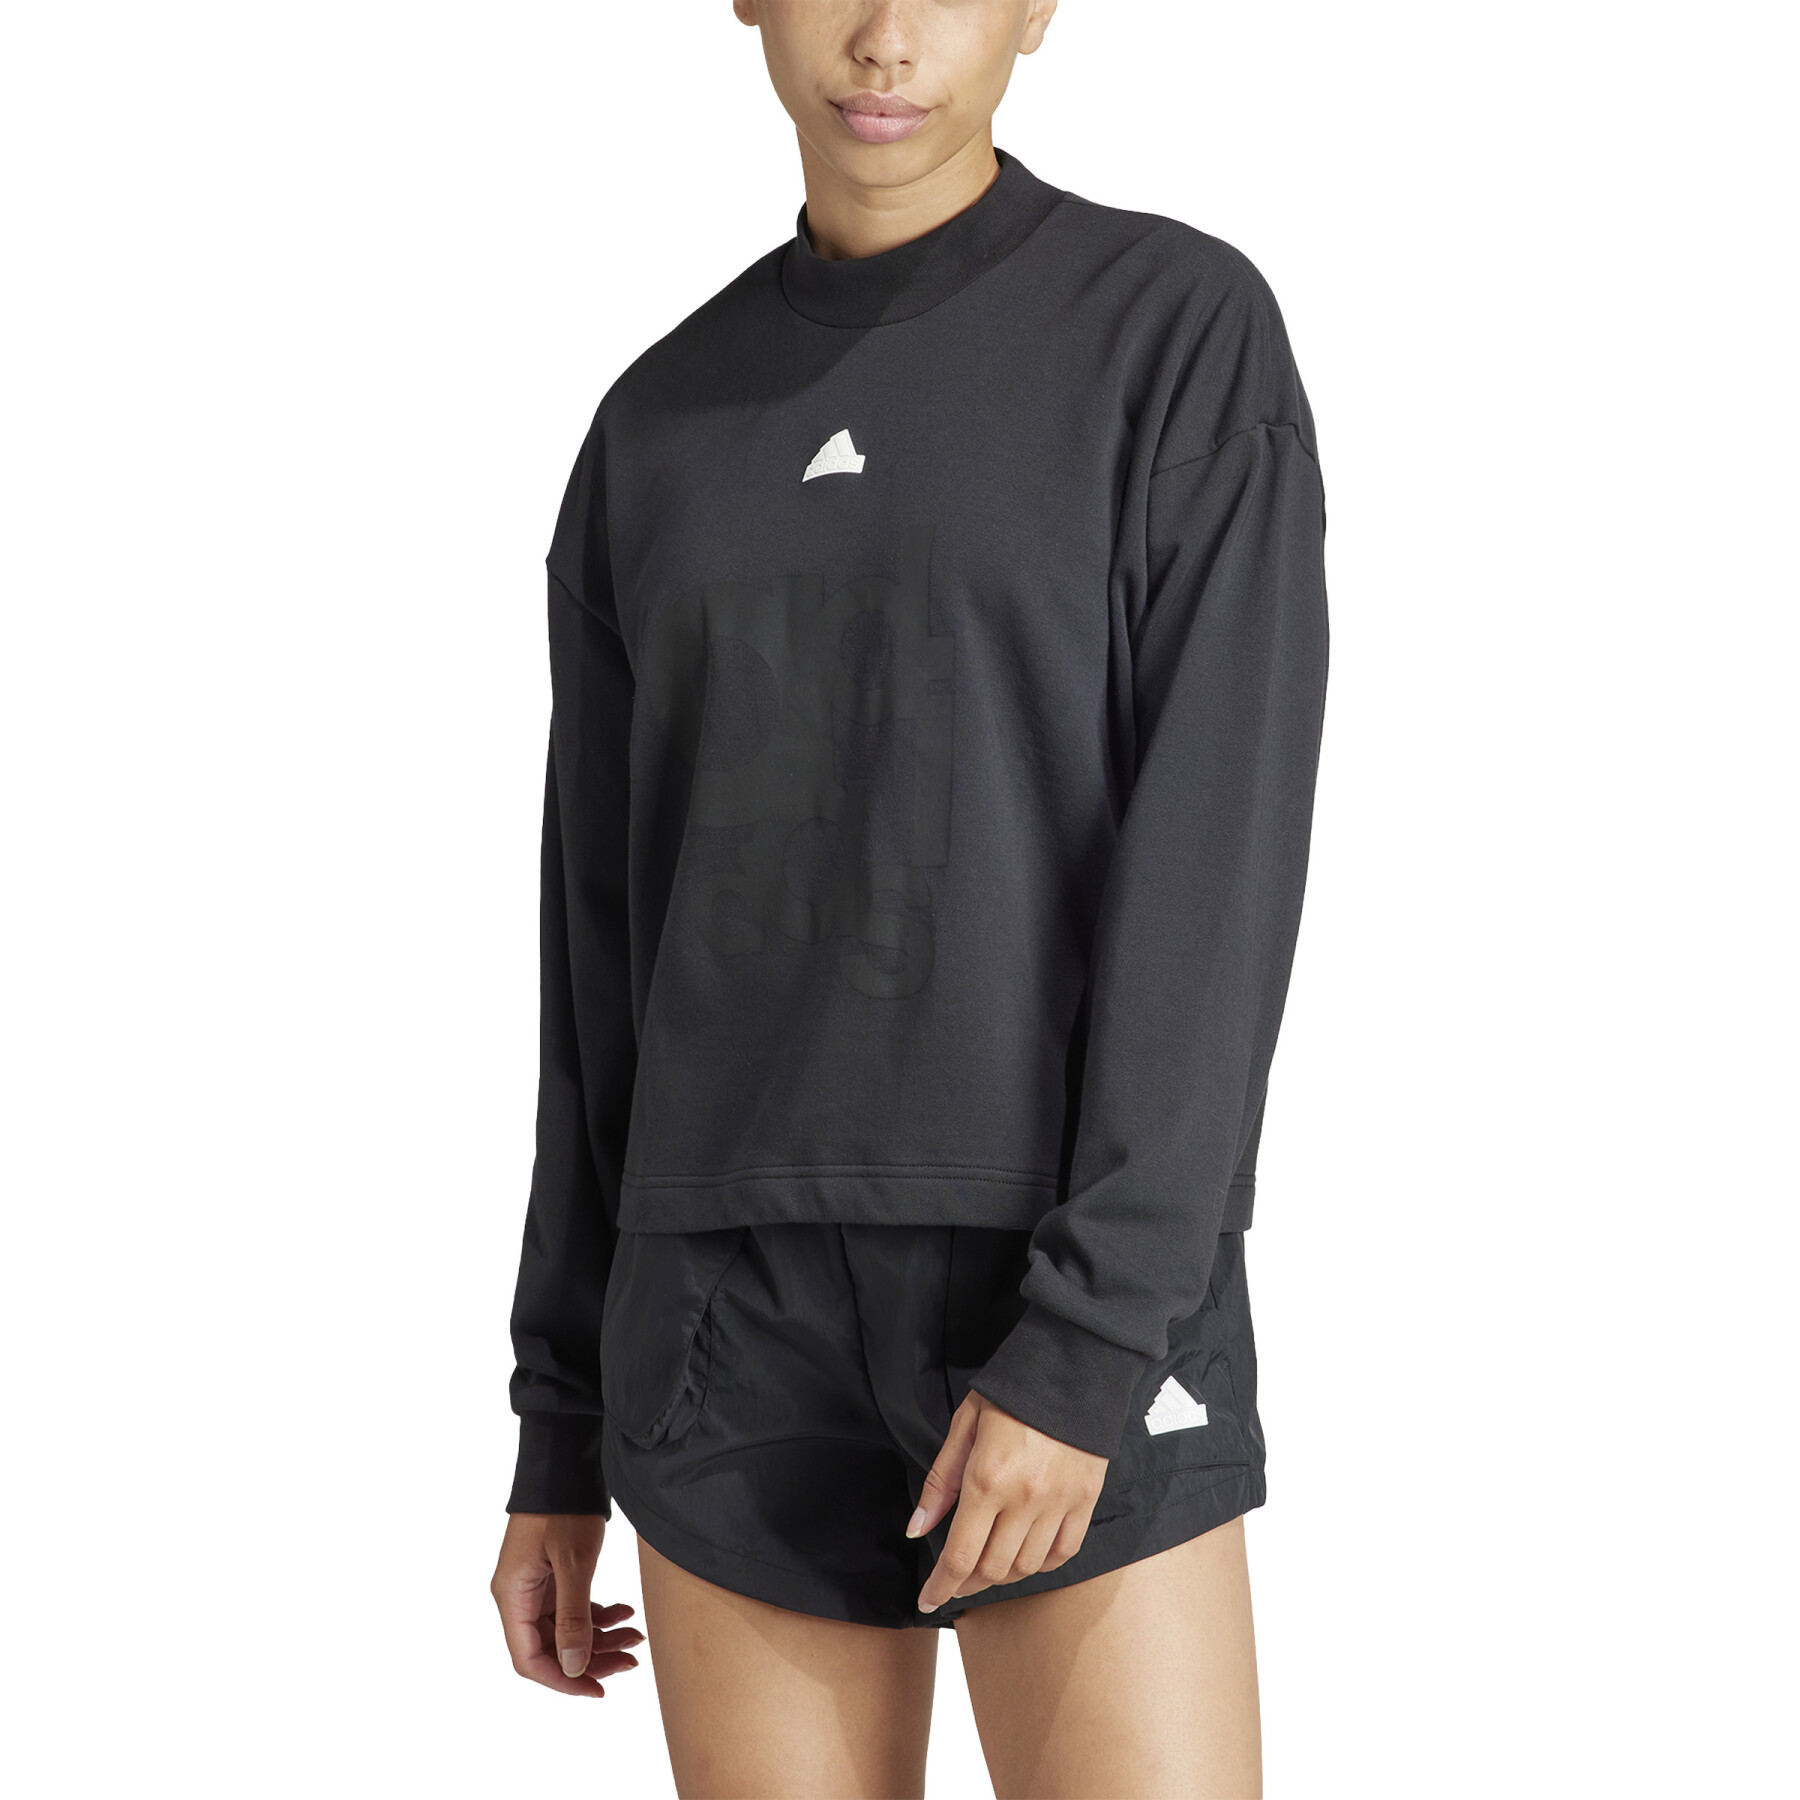 Women's loose-fitting French terry sweatshirt adidas